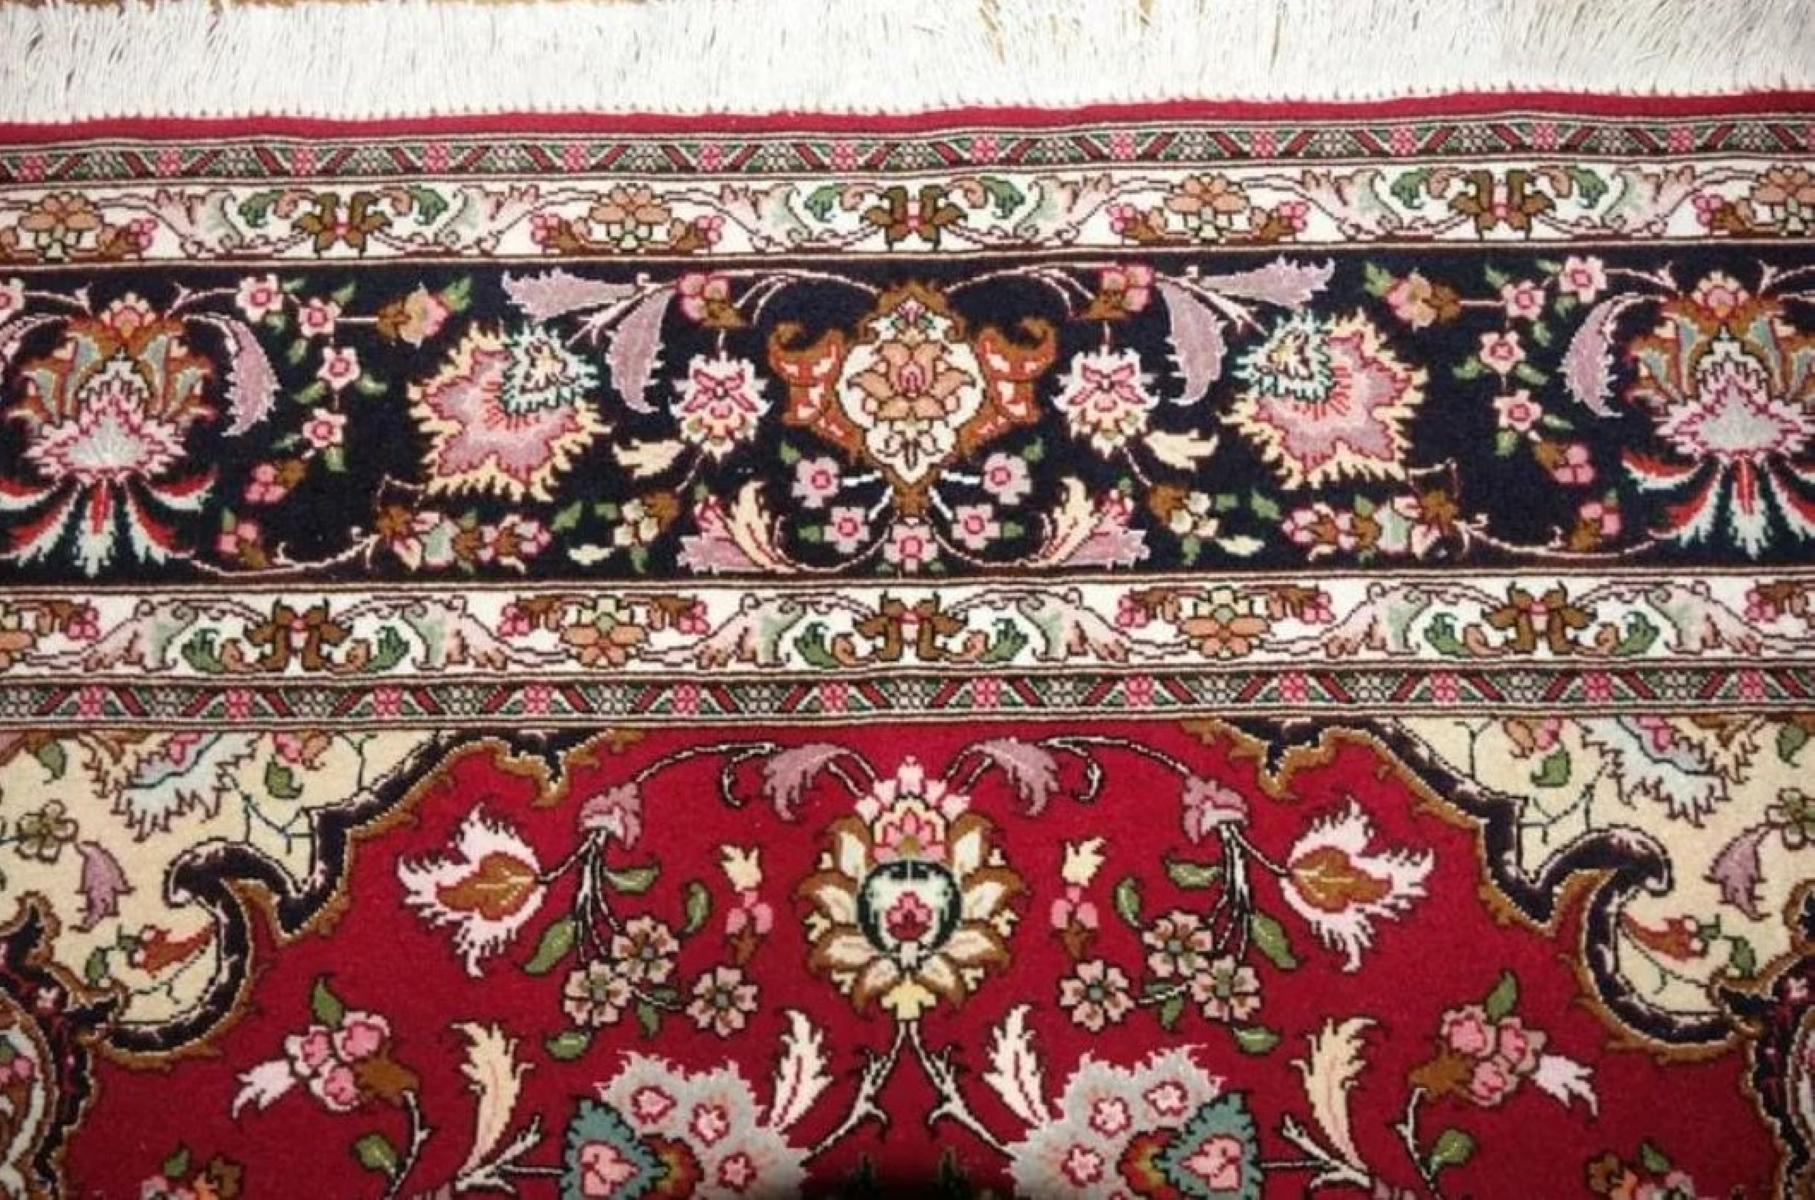 Very fine Persian Tabriz Silk & Wool Rug - 5' x 6.1' In Excellent Condition For Sale In Newmanstown, PA